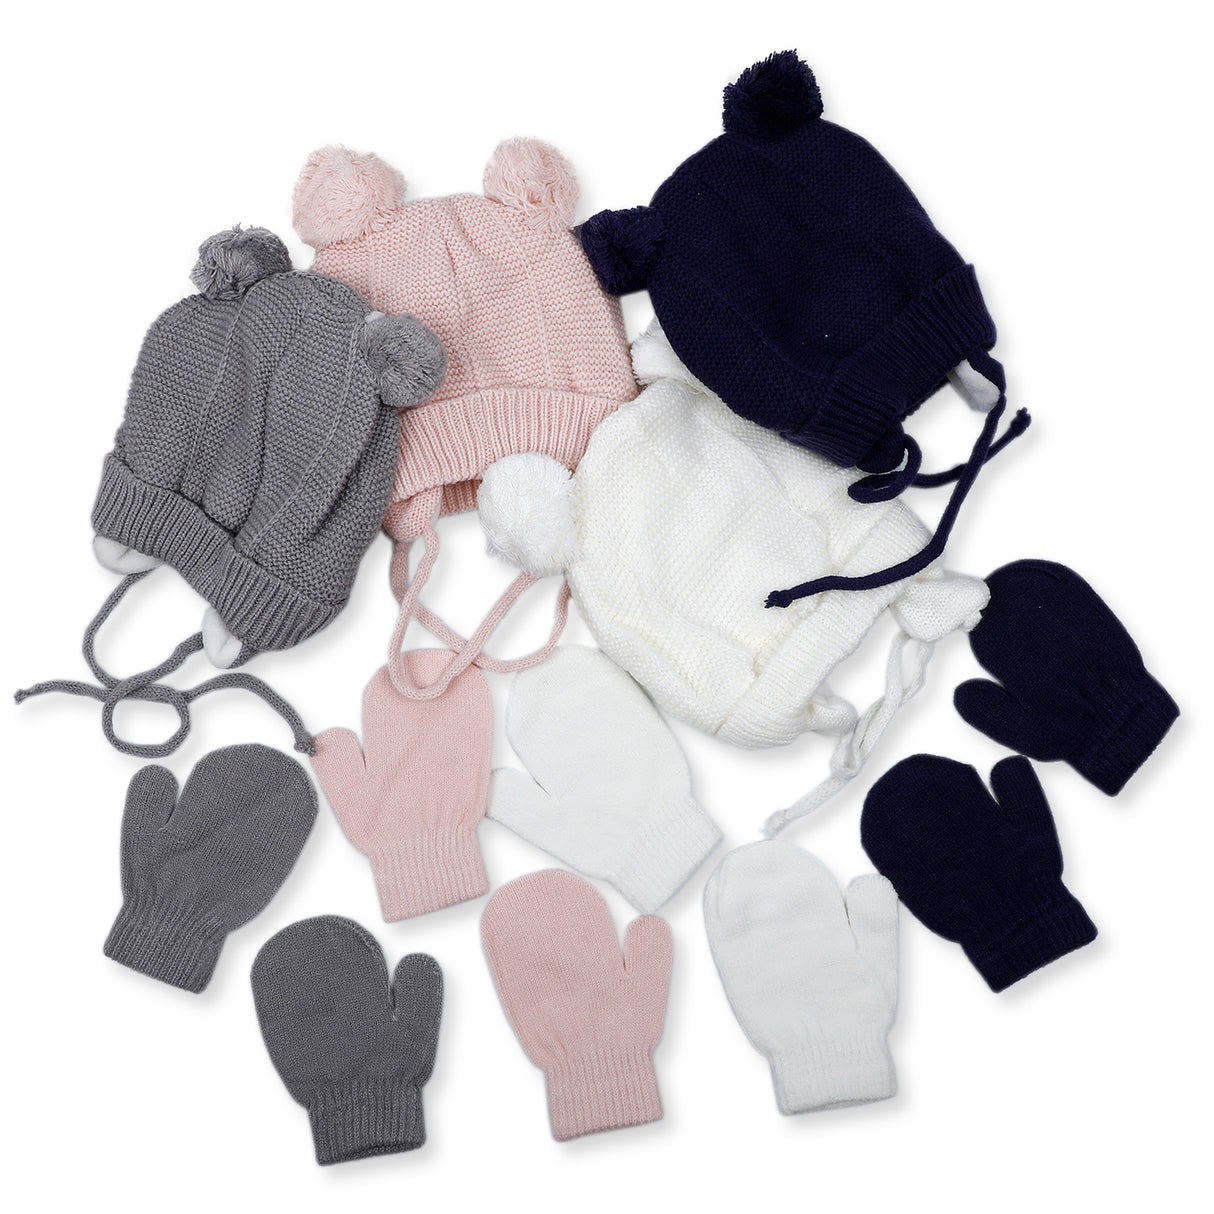 Plain Soft And Streatchable Woollen Cap And Glove Set